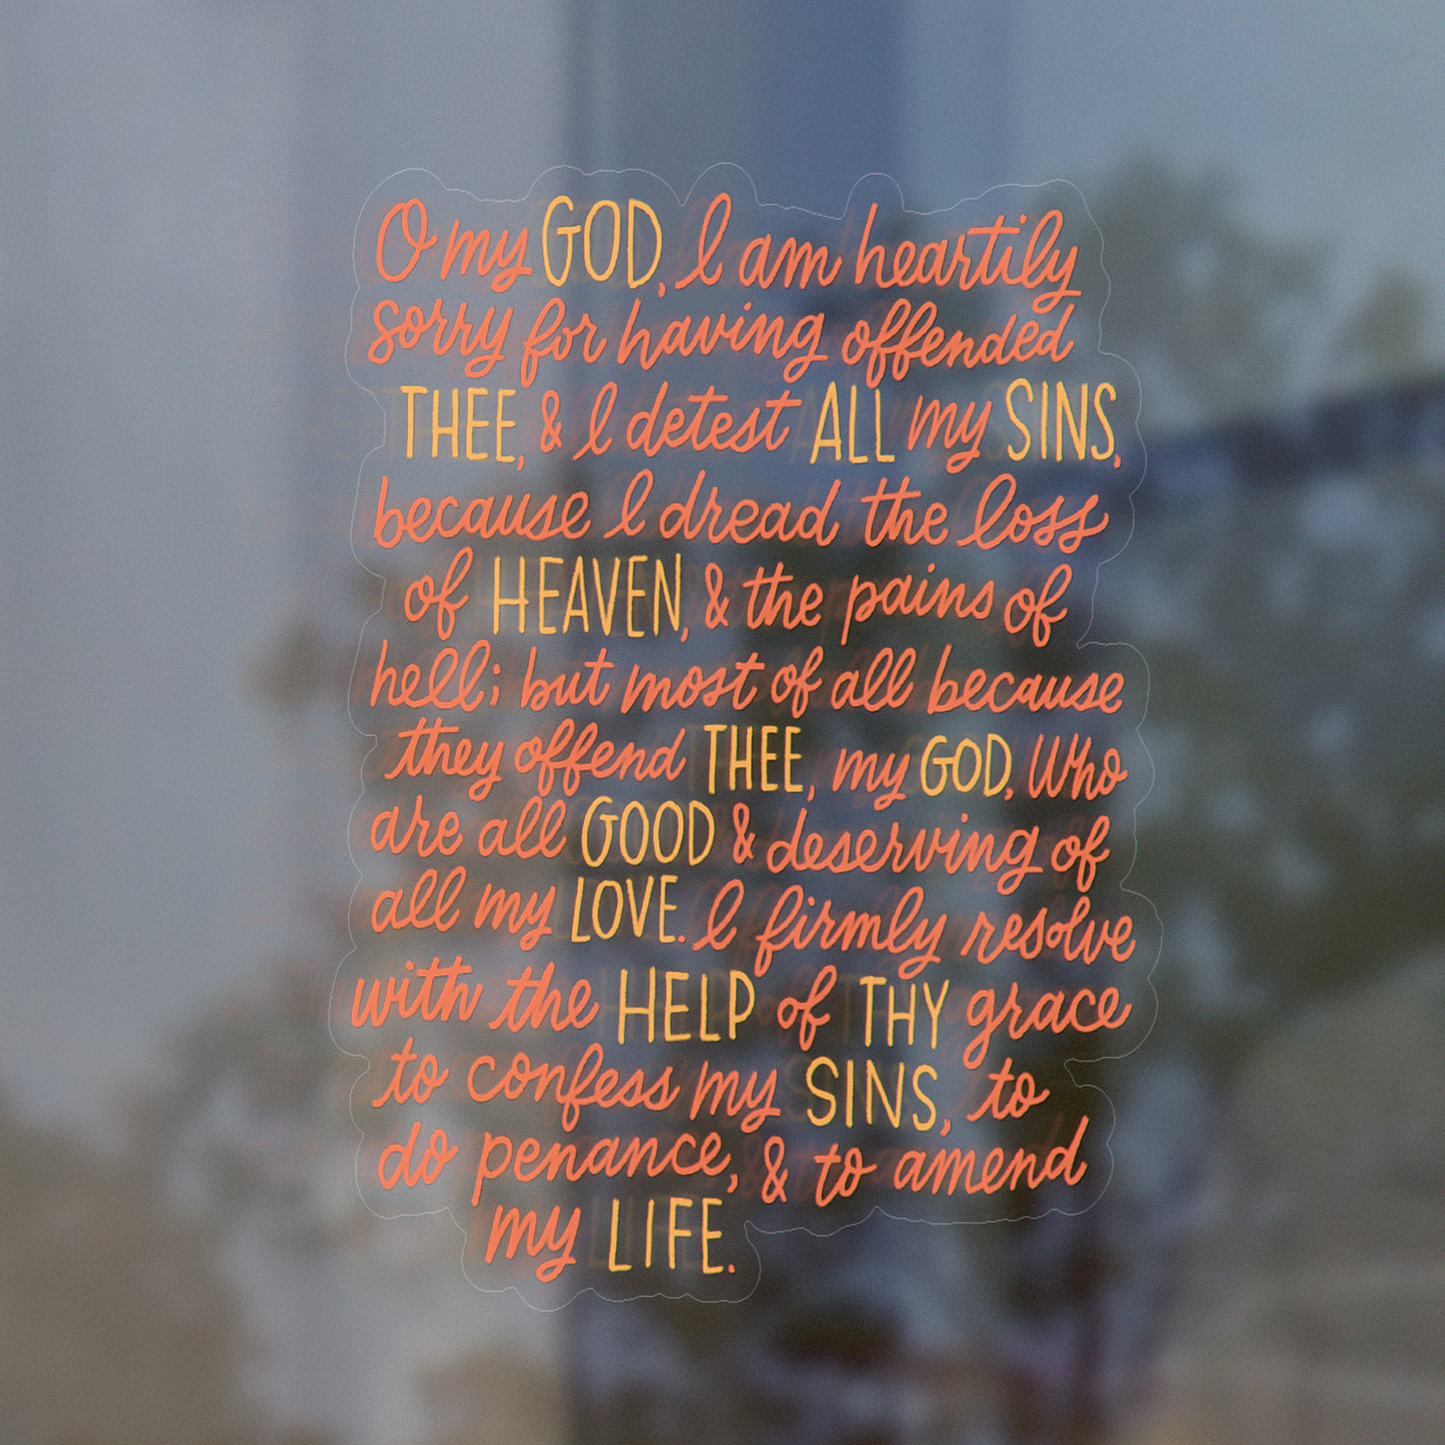 Act of Contrition Window Cling